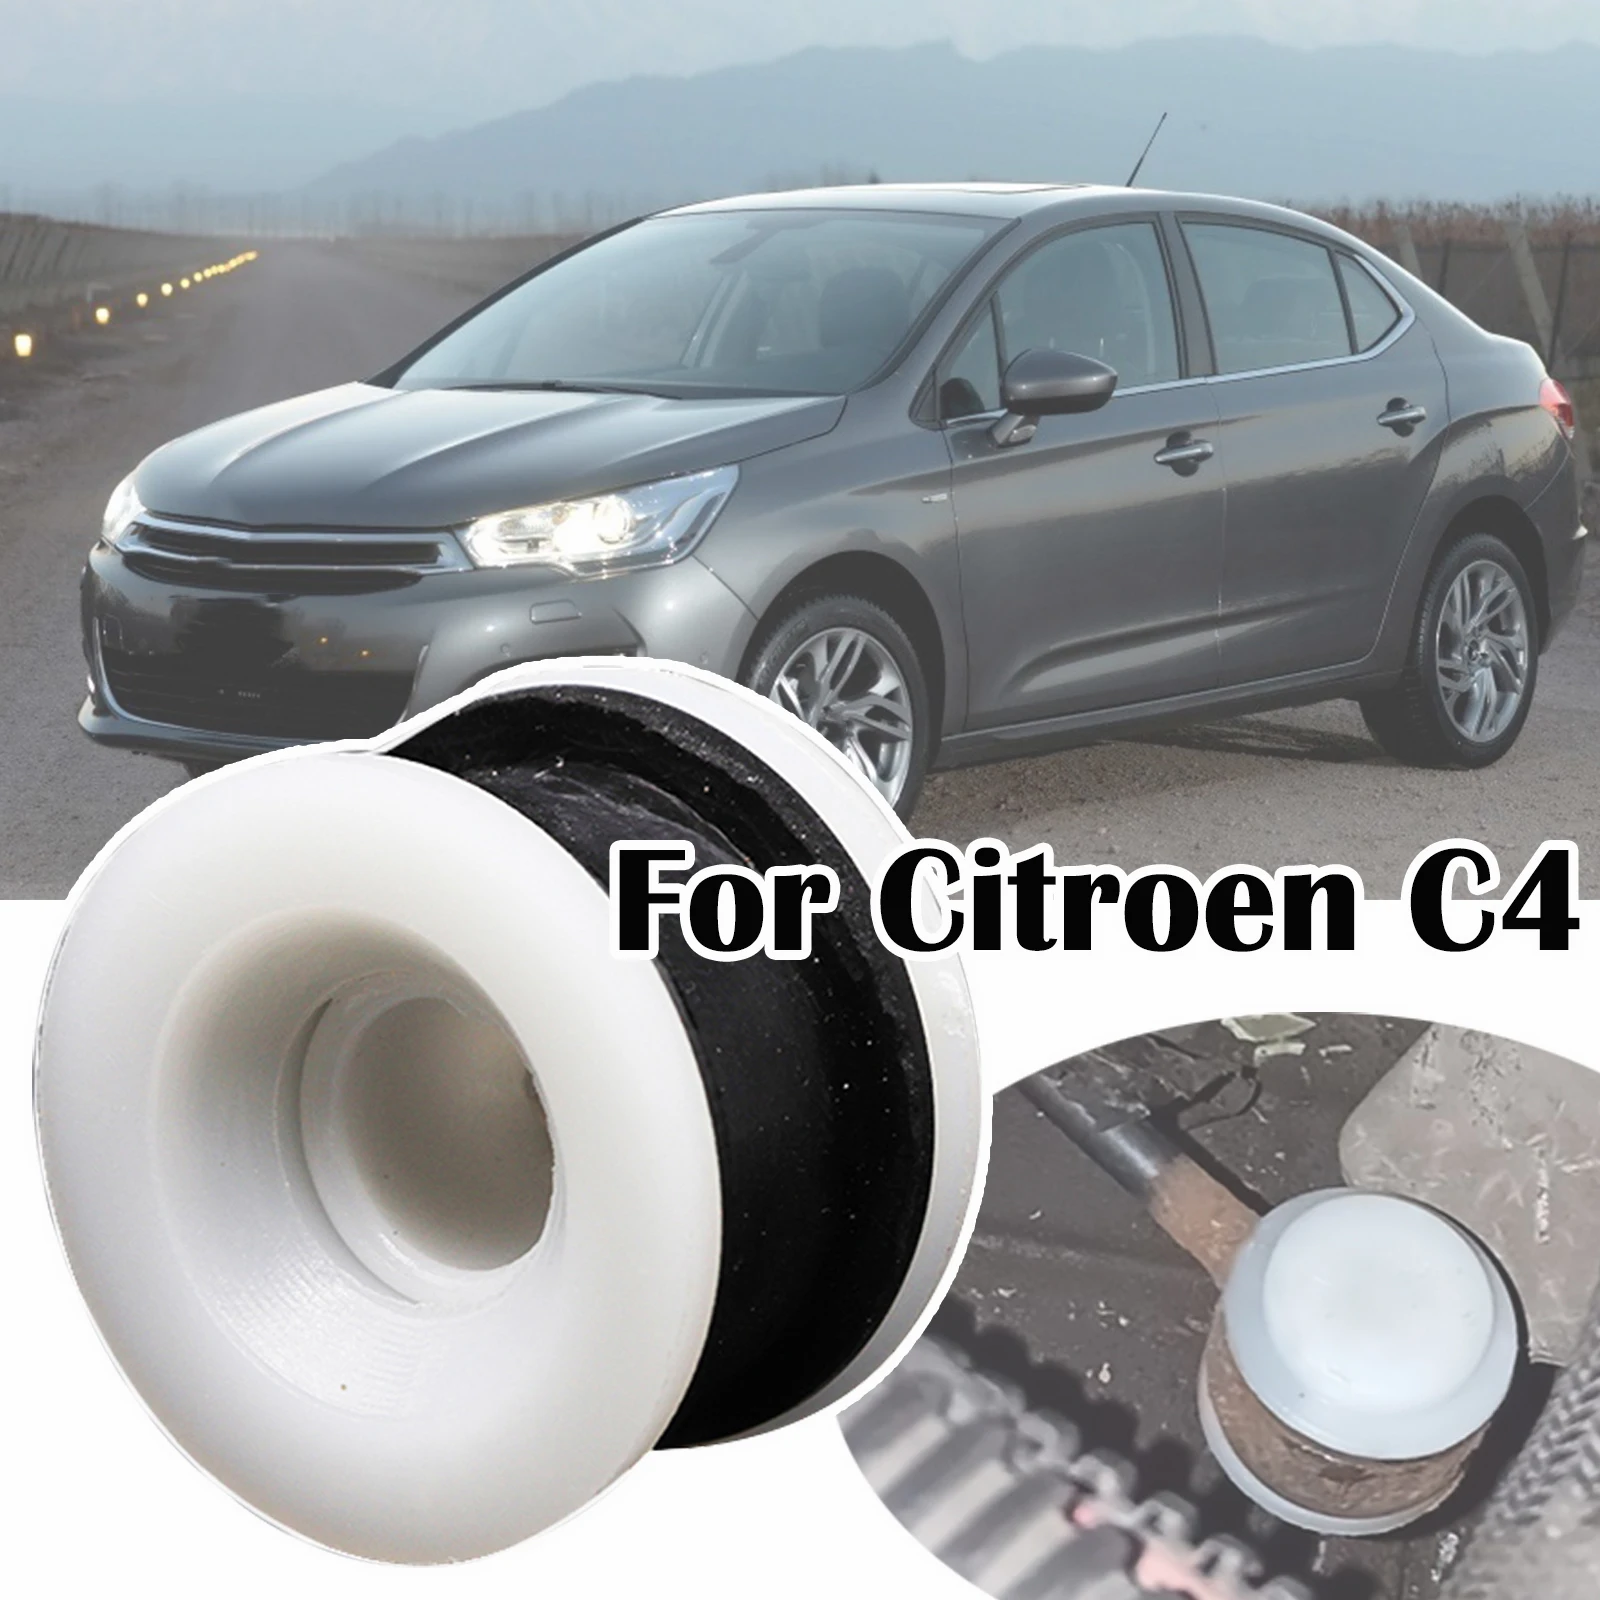 Gearbox Cable Linkage Rubber Bushing For Citroen C4 Picasso DS4 Manual Transmission Shift Assembly Repair Kit Replacement Parts